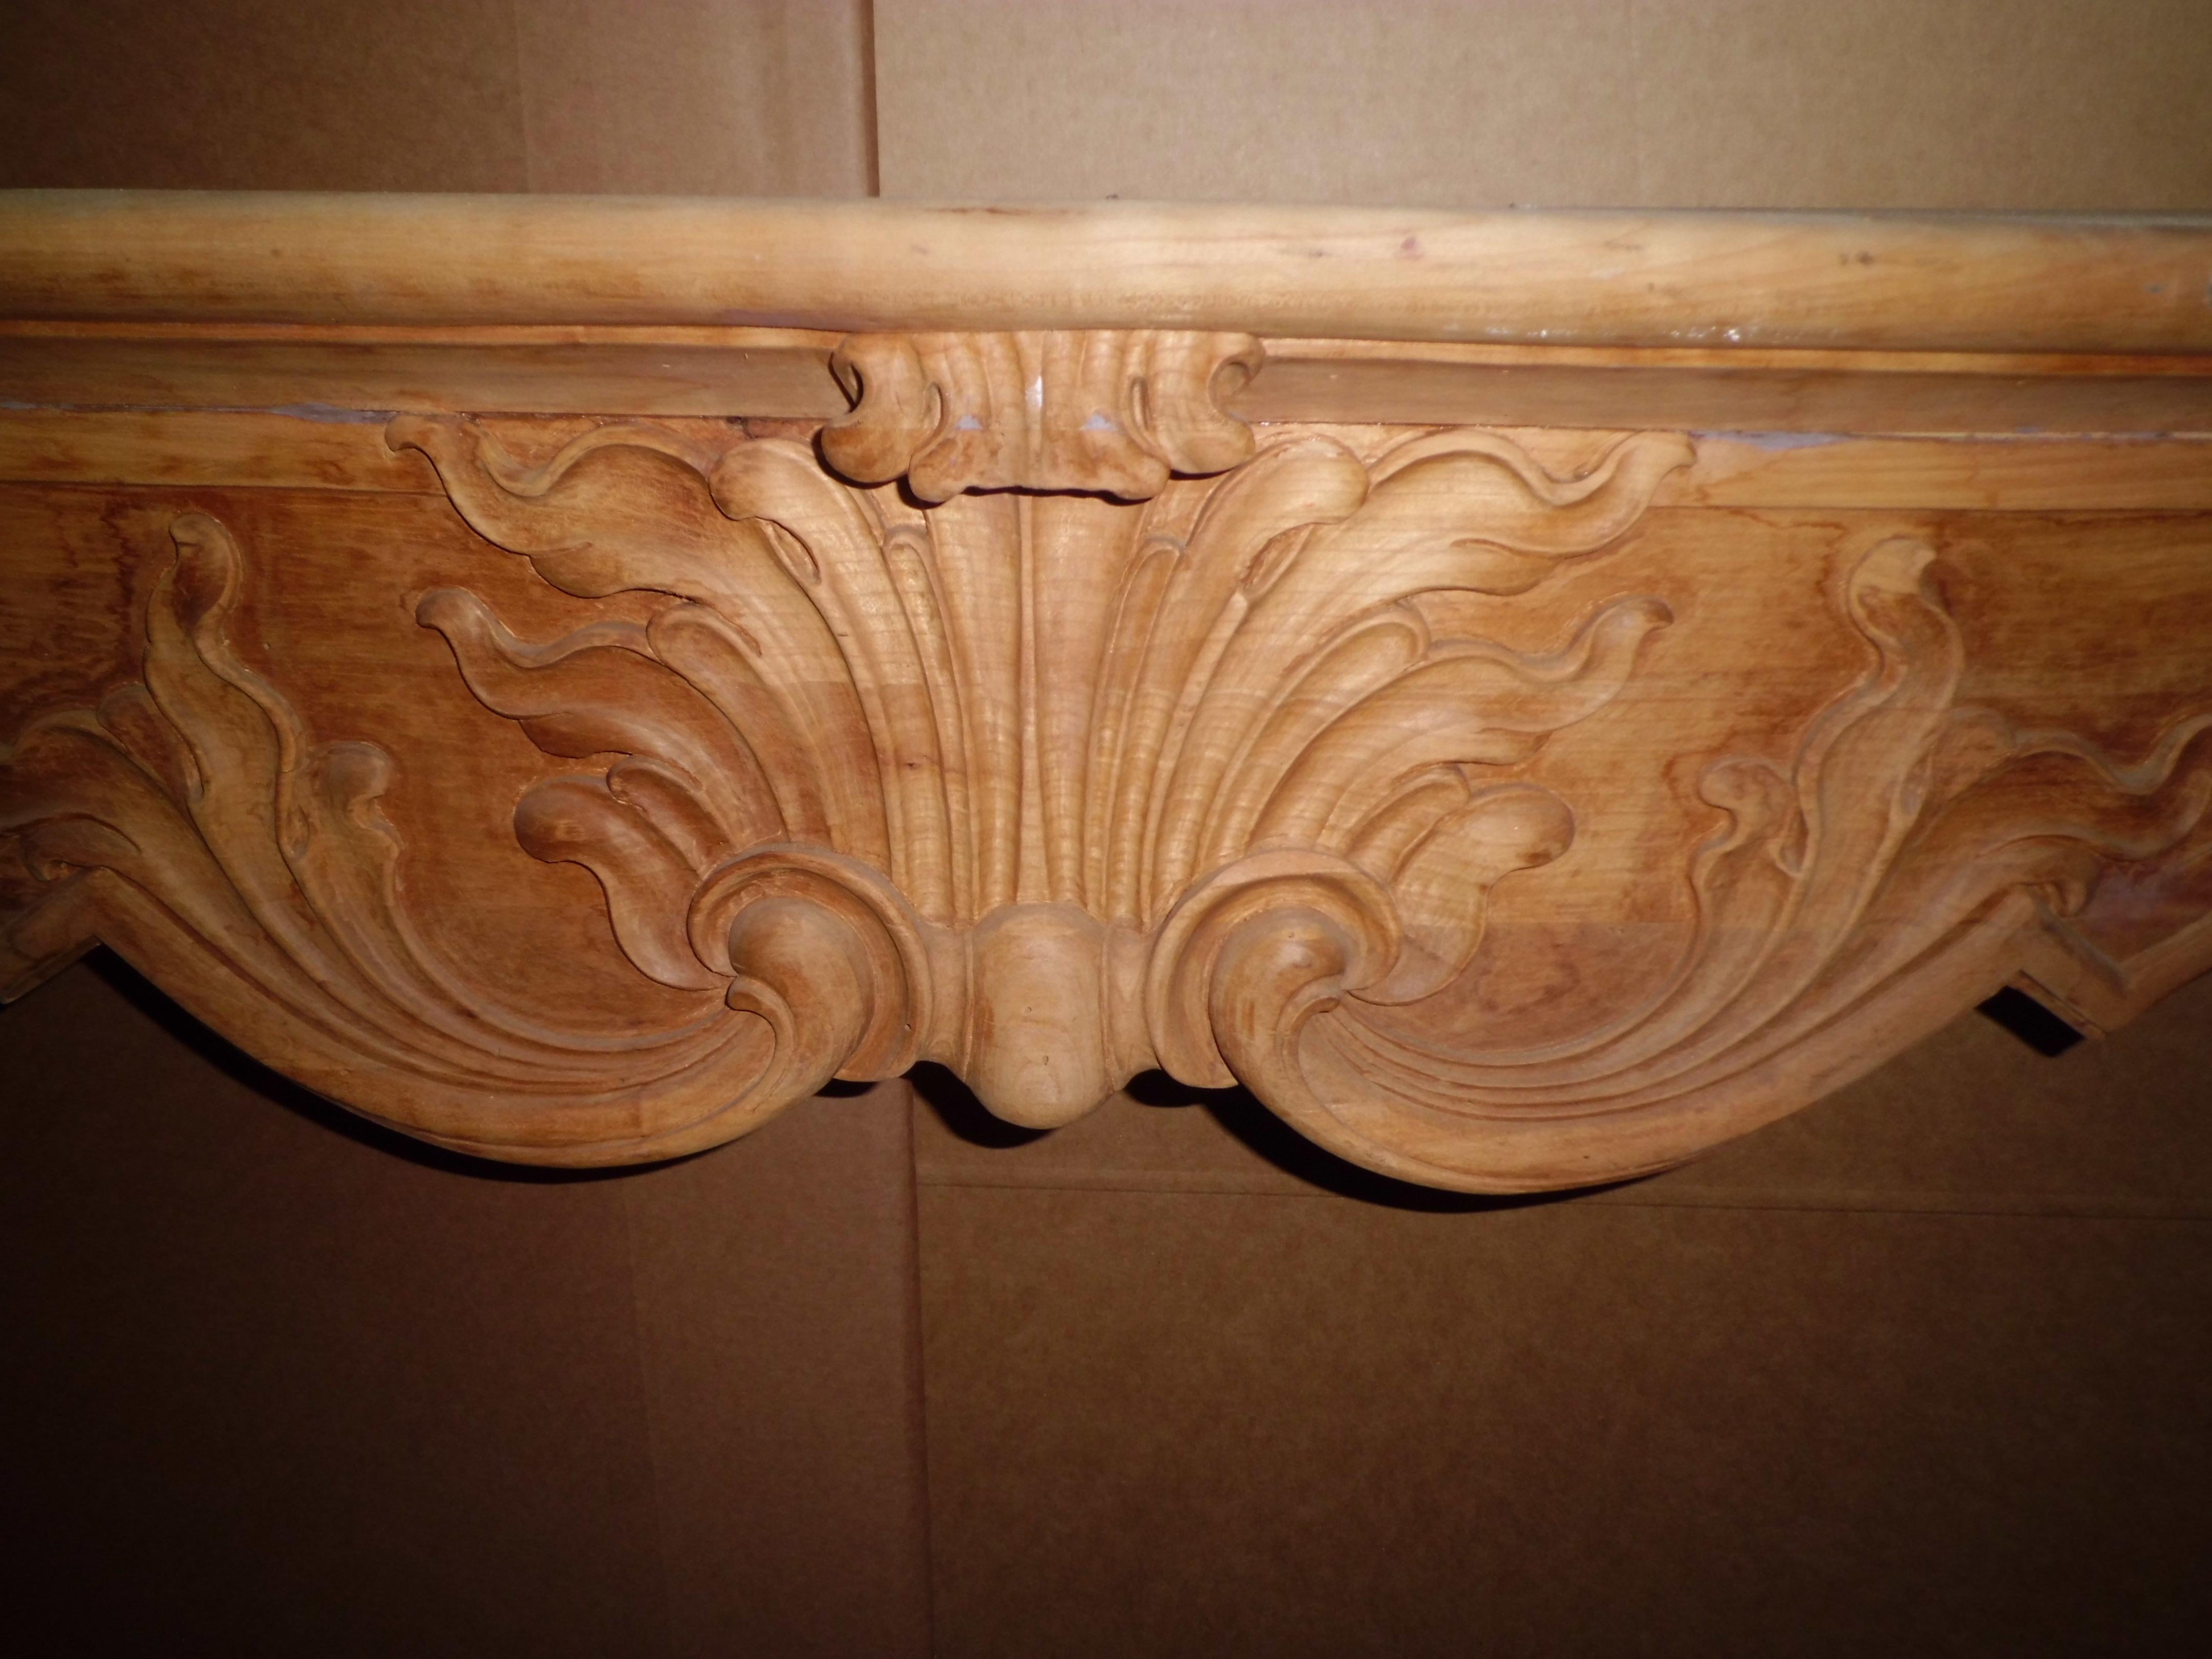 20th Century Italy 1920 Regence style Wood Mantel
Hand carved, solid cherrywood.
Measures: Depth 20 cm
Width 161 cm
Height 124 cm.